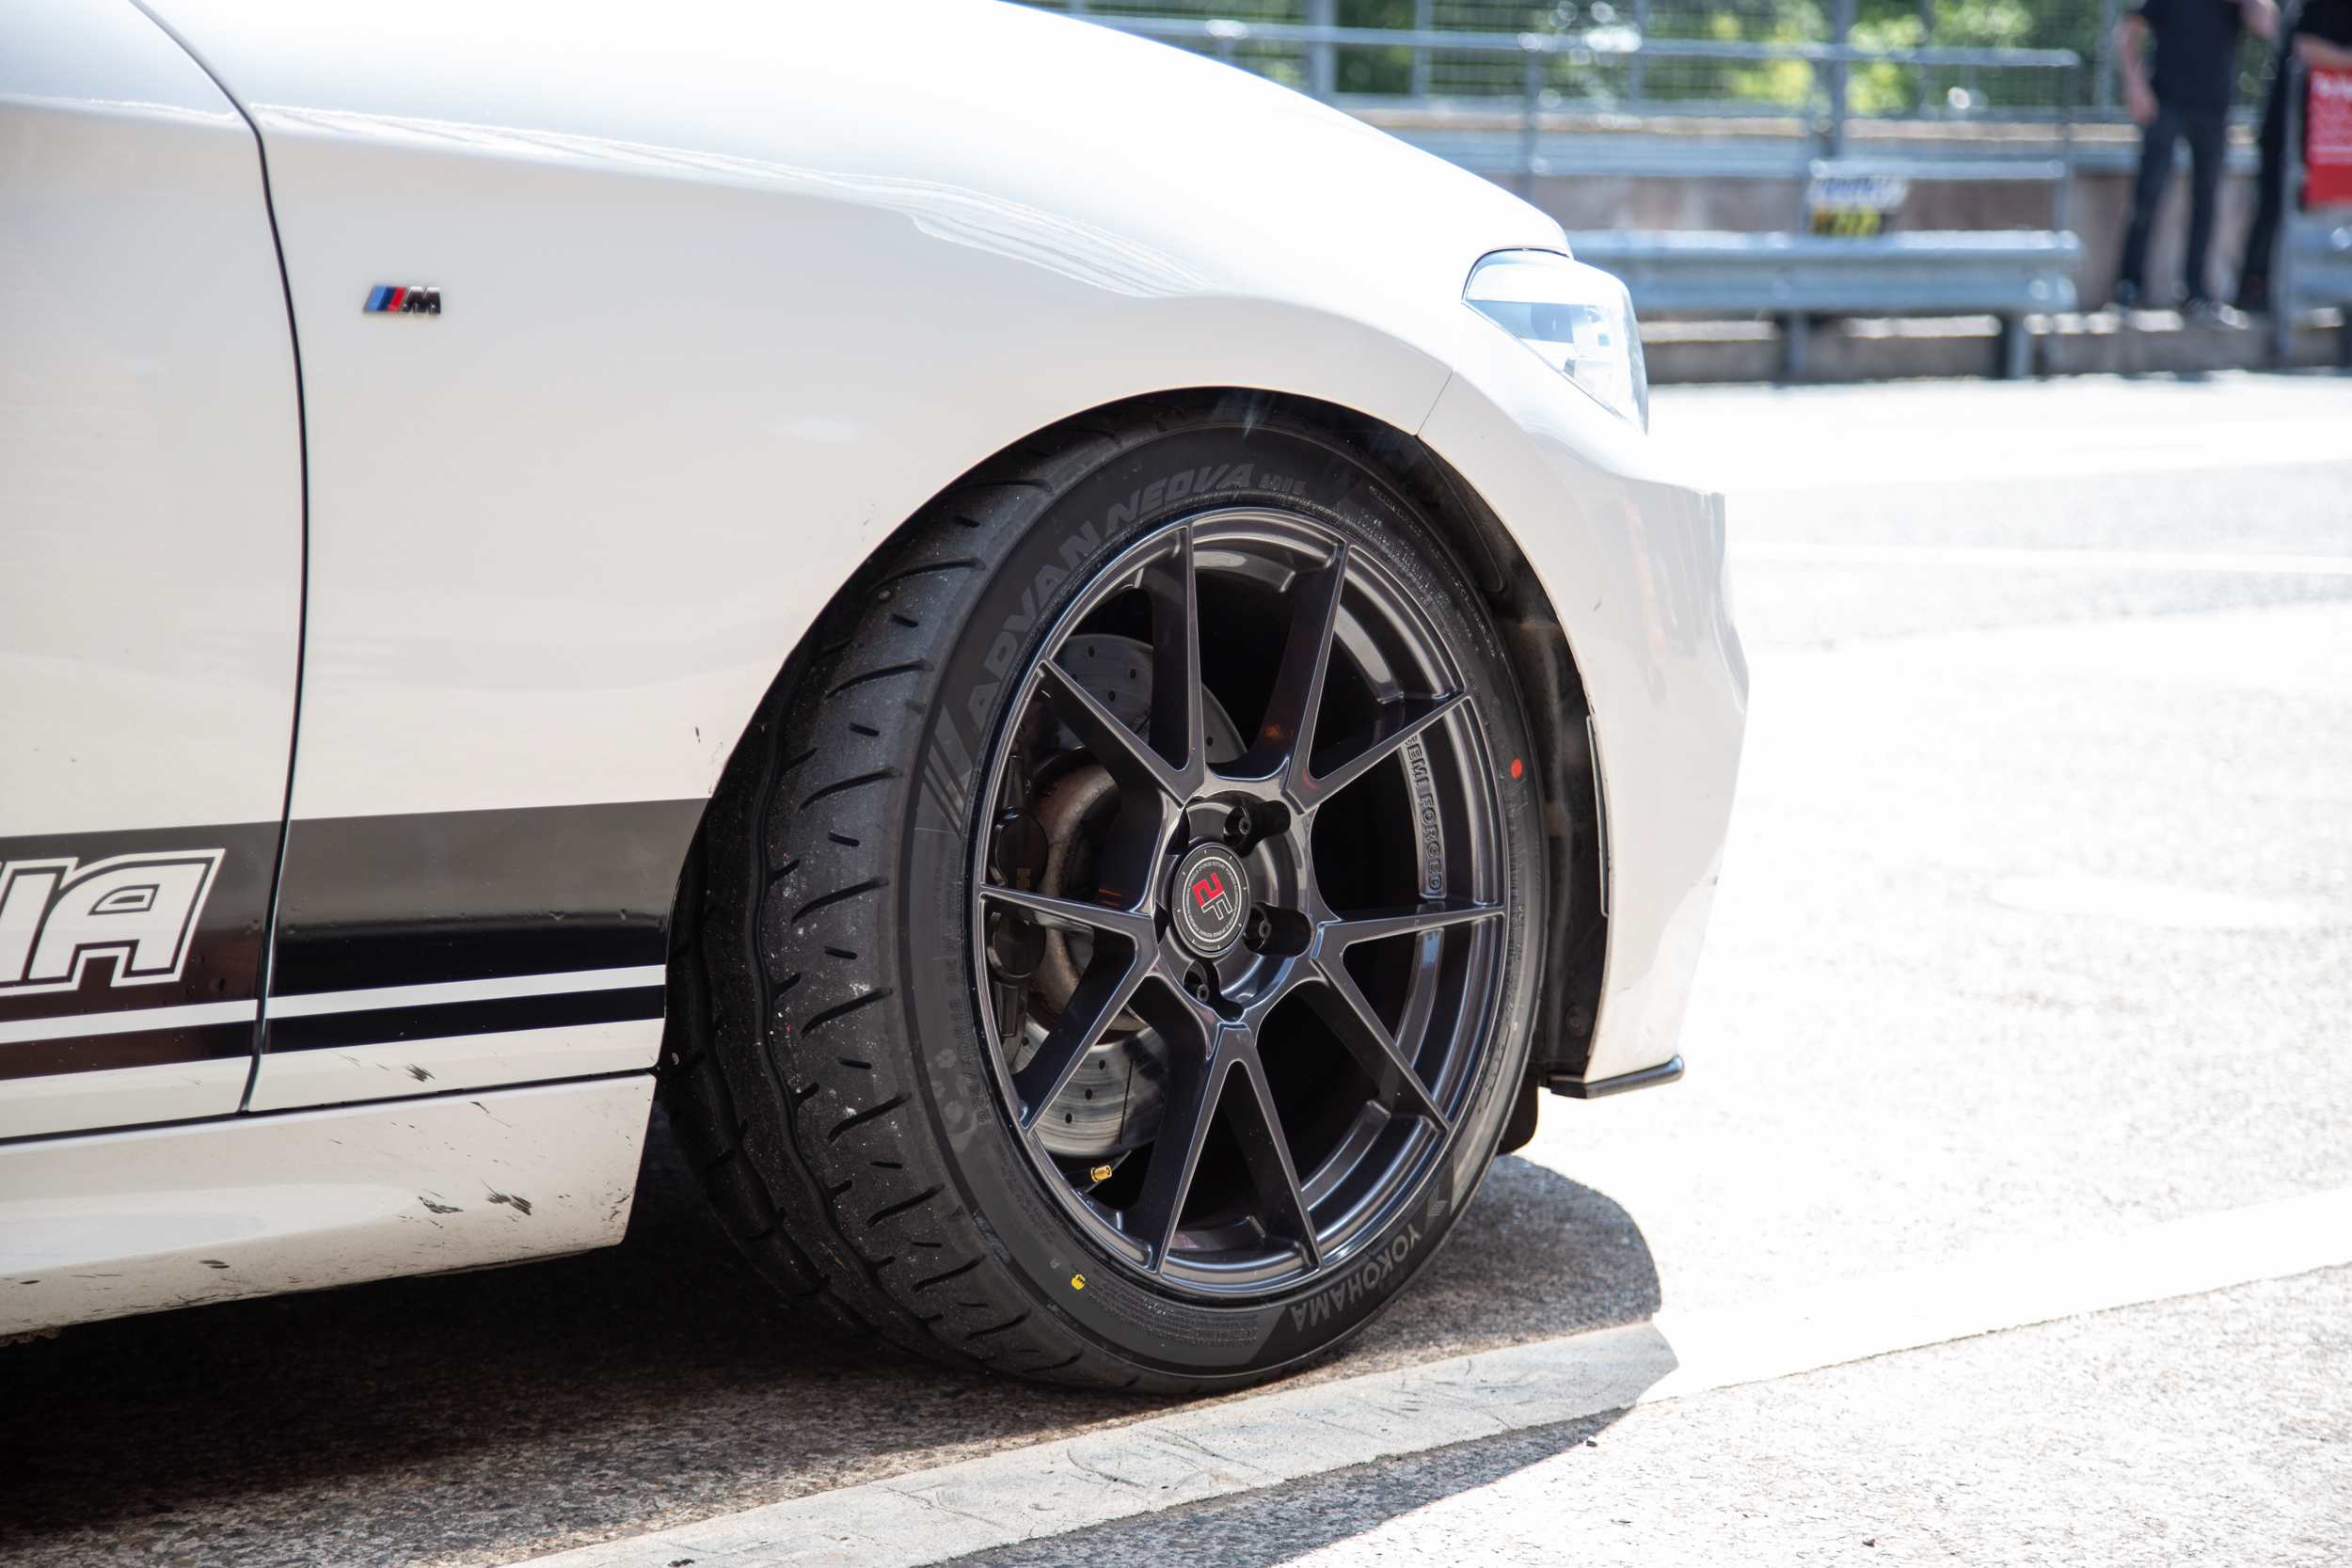 Popular Choices for Car Tyre and Rim Care - Blog